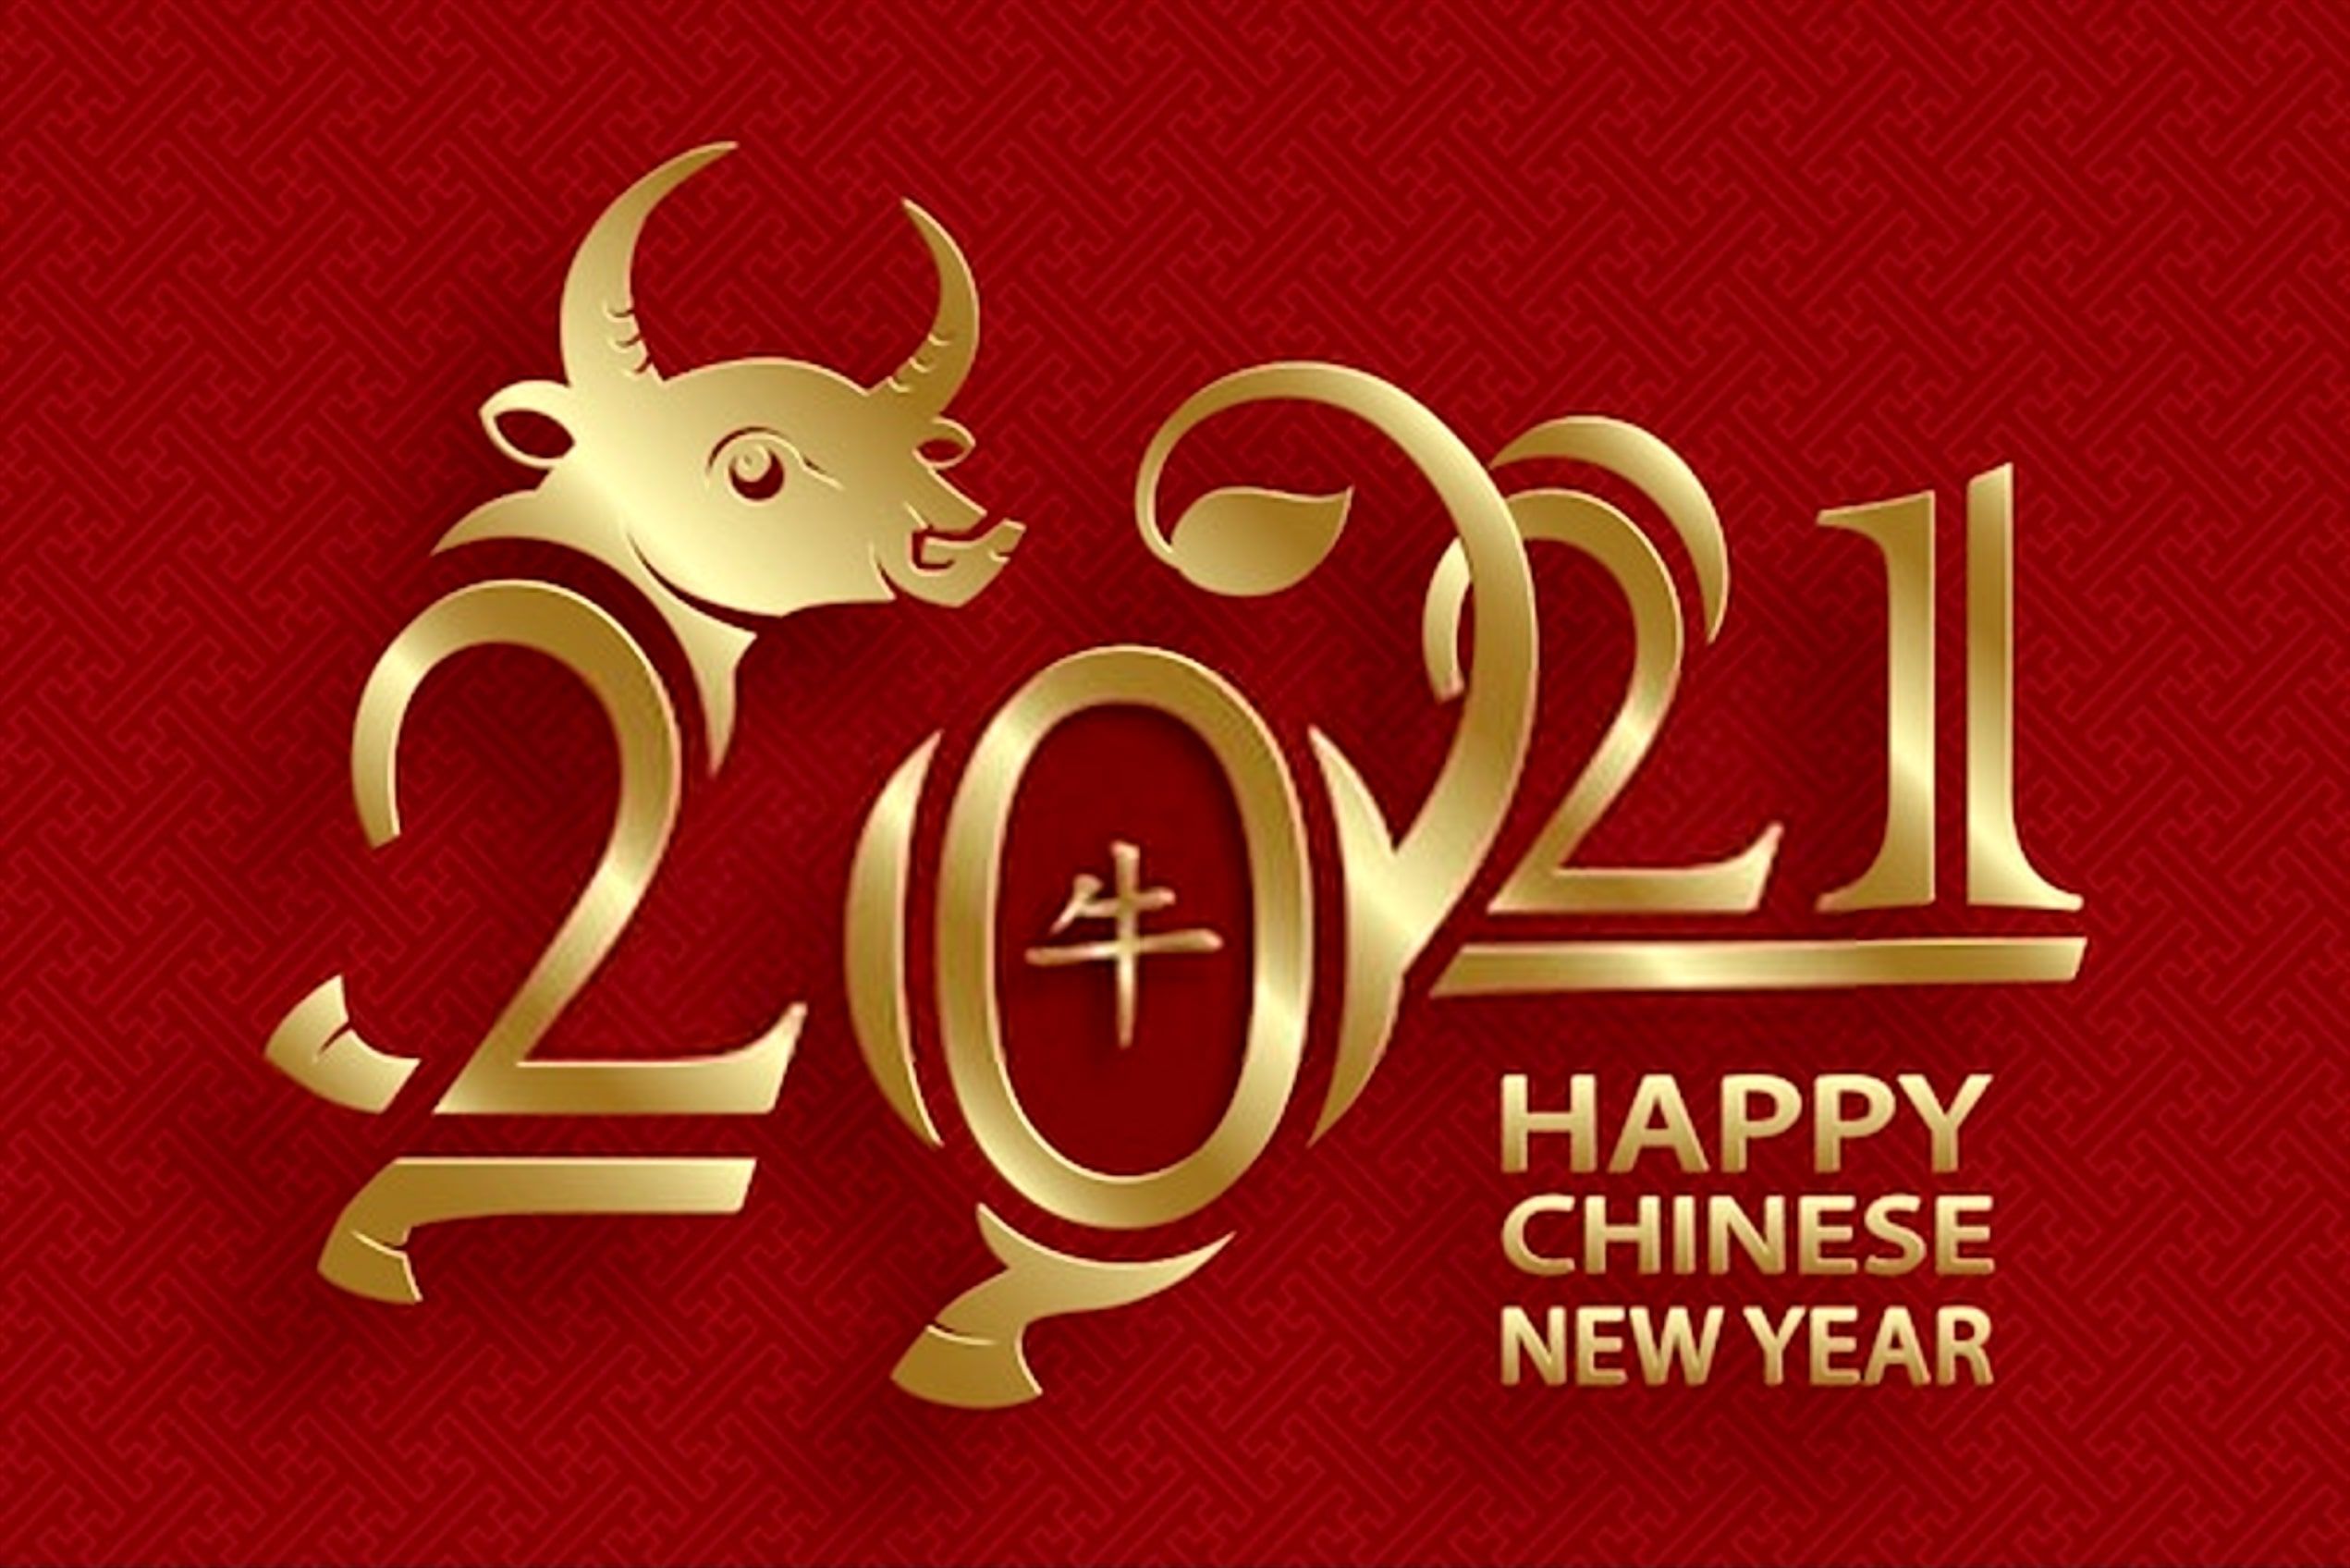 2542x1696 Chinese New Year 2022 Image And Wallpaper In 2022 Happy Chinese New Year Chinese New Year Image Newyear